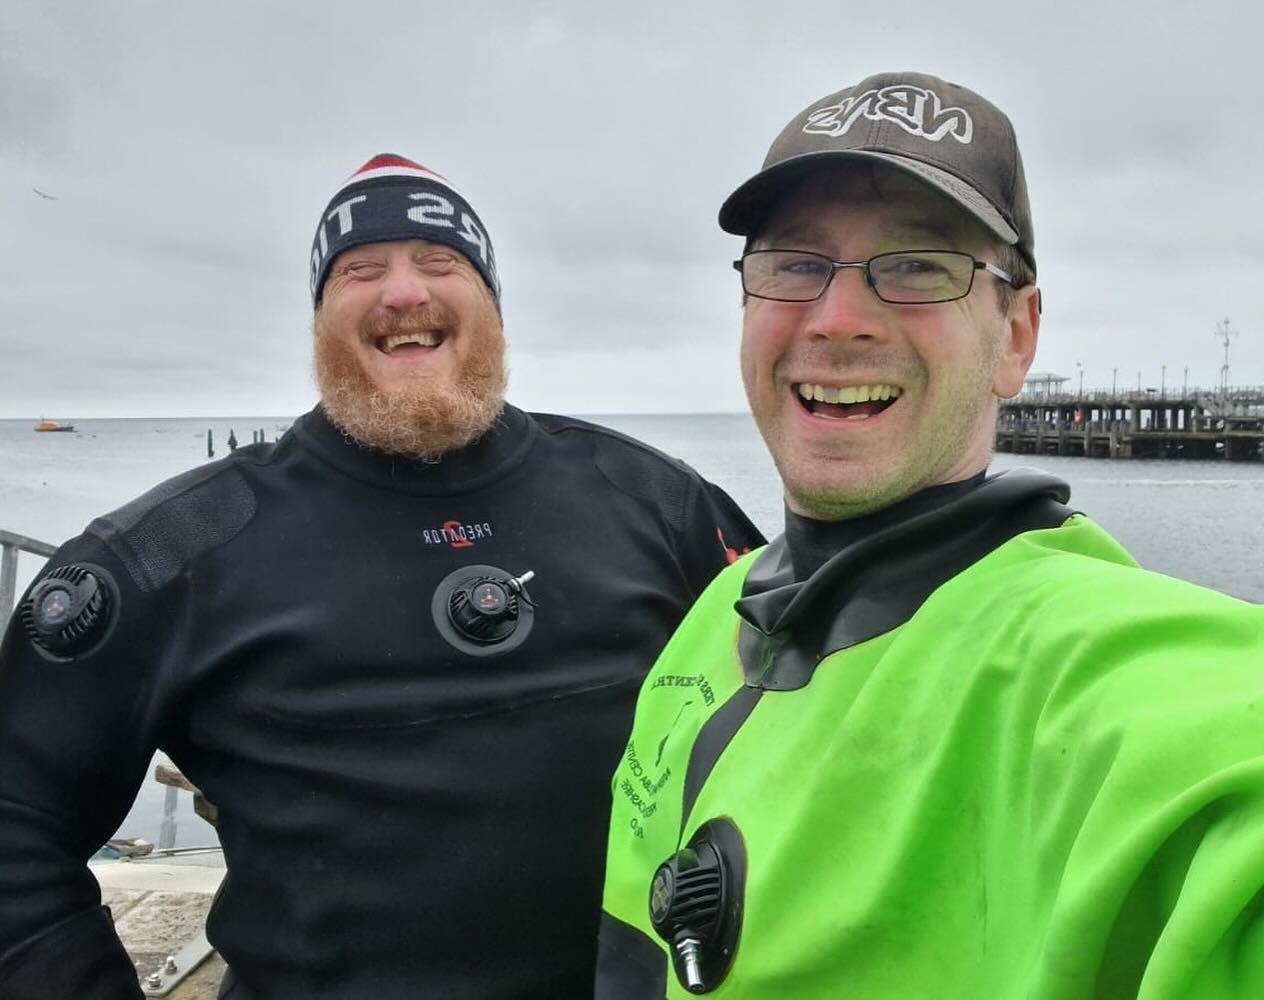 Our divers are in Swanage and ready for tomorrow&rsquo;s diving adventures.

2 cheeky divers managed to sneak in a little pier dive in earlier today- look at Dave &amp; Pete&rsquo;s post dive happy faces! 🤿

#Leicesterunderwaterexplorationclub #luec